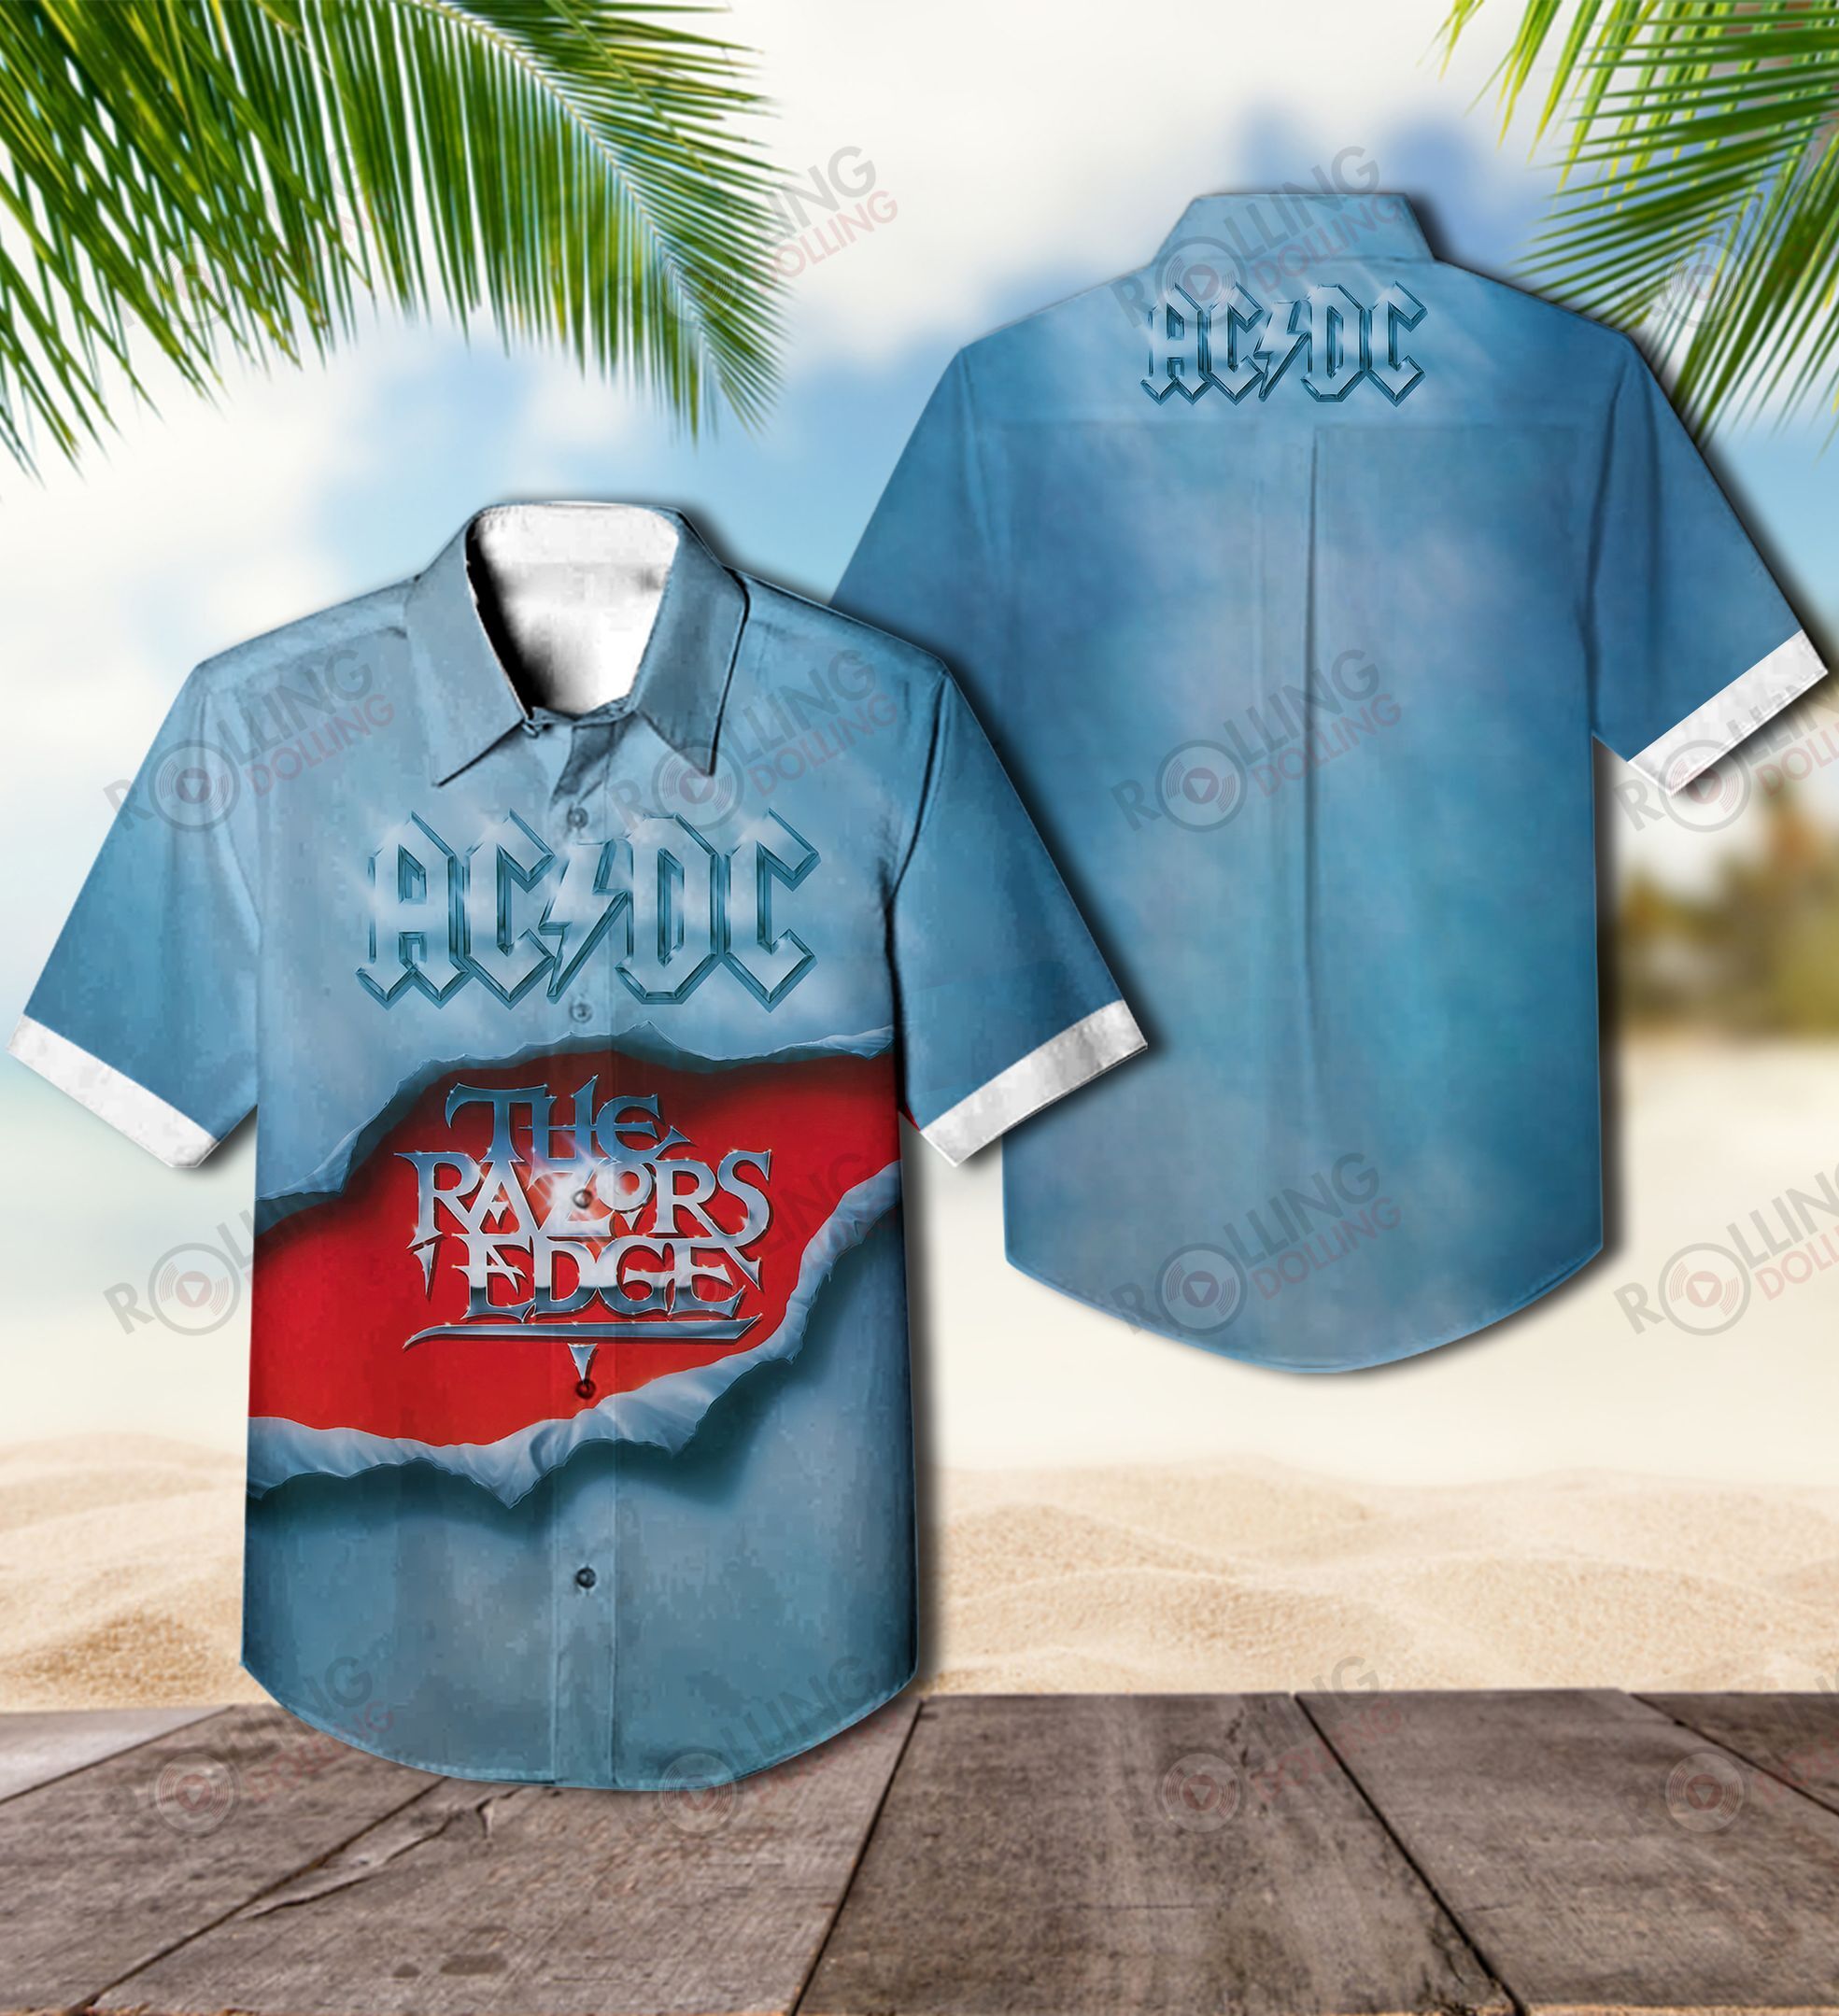 The Hawaiian Shirt is a popular shirt that is worn by Rock band fans 26